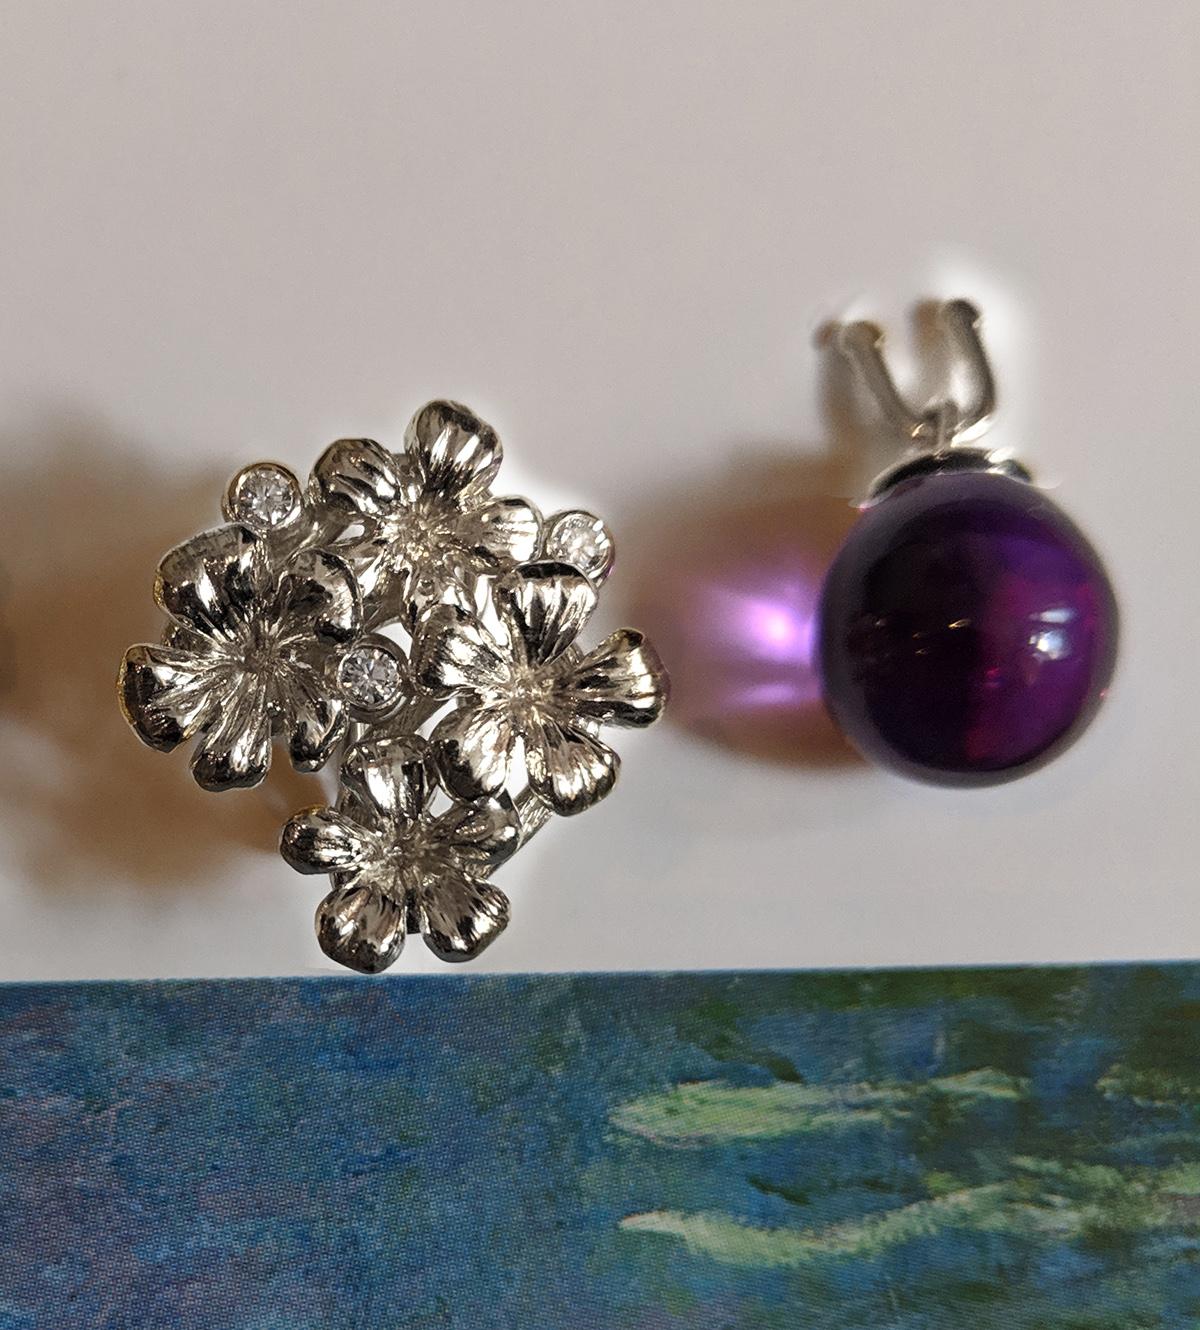 14 karat white gold Plum Blossom brooch with a removable amethyst drop, encrusted with 3 round diamonds, is a contemporary jewellery piece that has been featured in Vogue UA reviews. The cabochon gem can be easily replaced with other gem drops. We